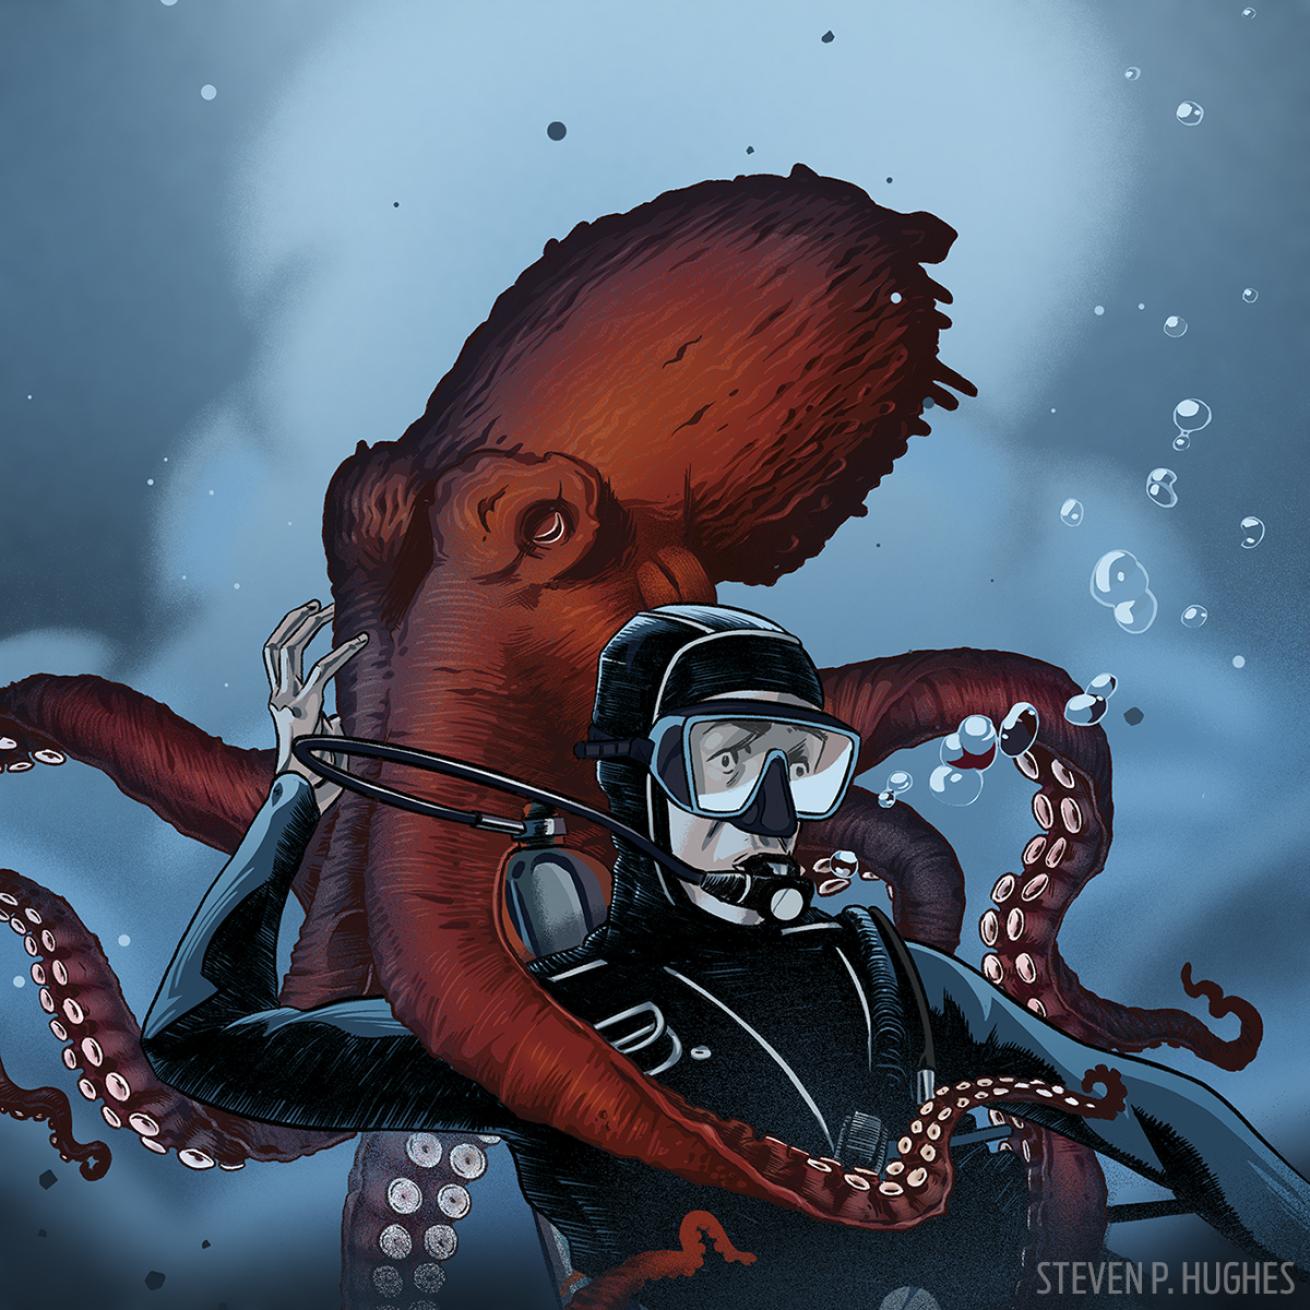 giant pacific octopus attack 